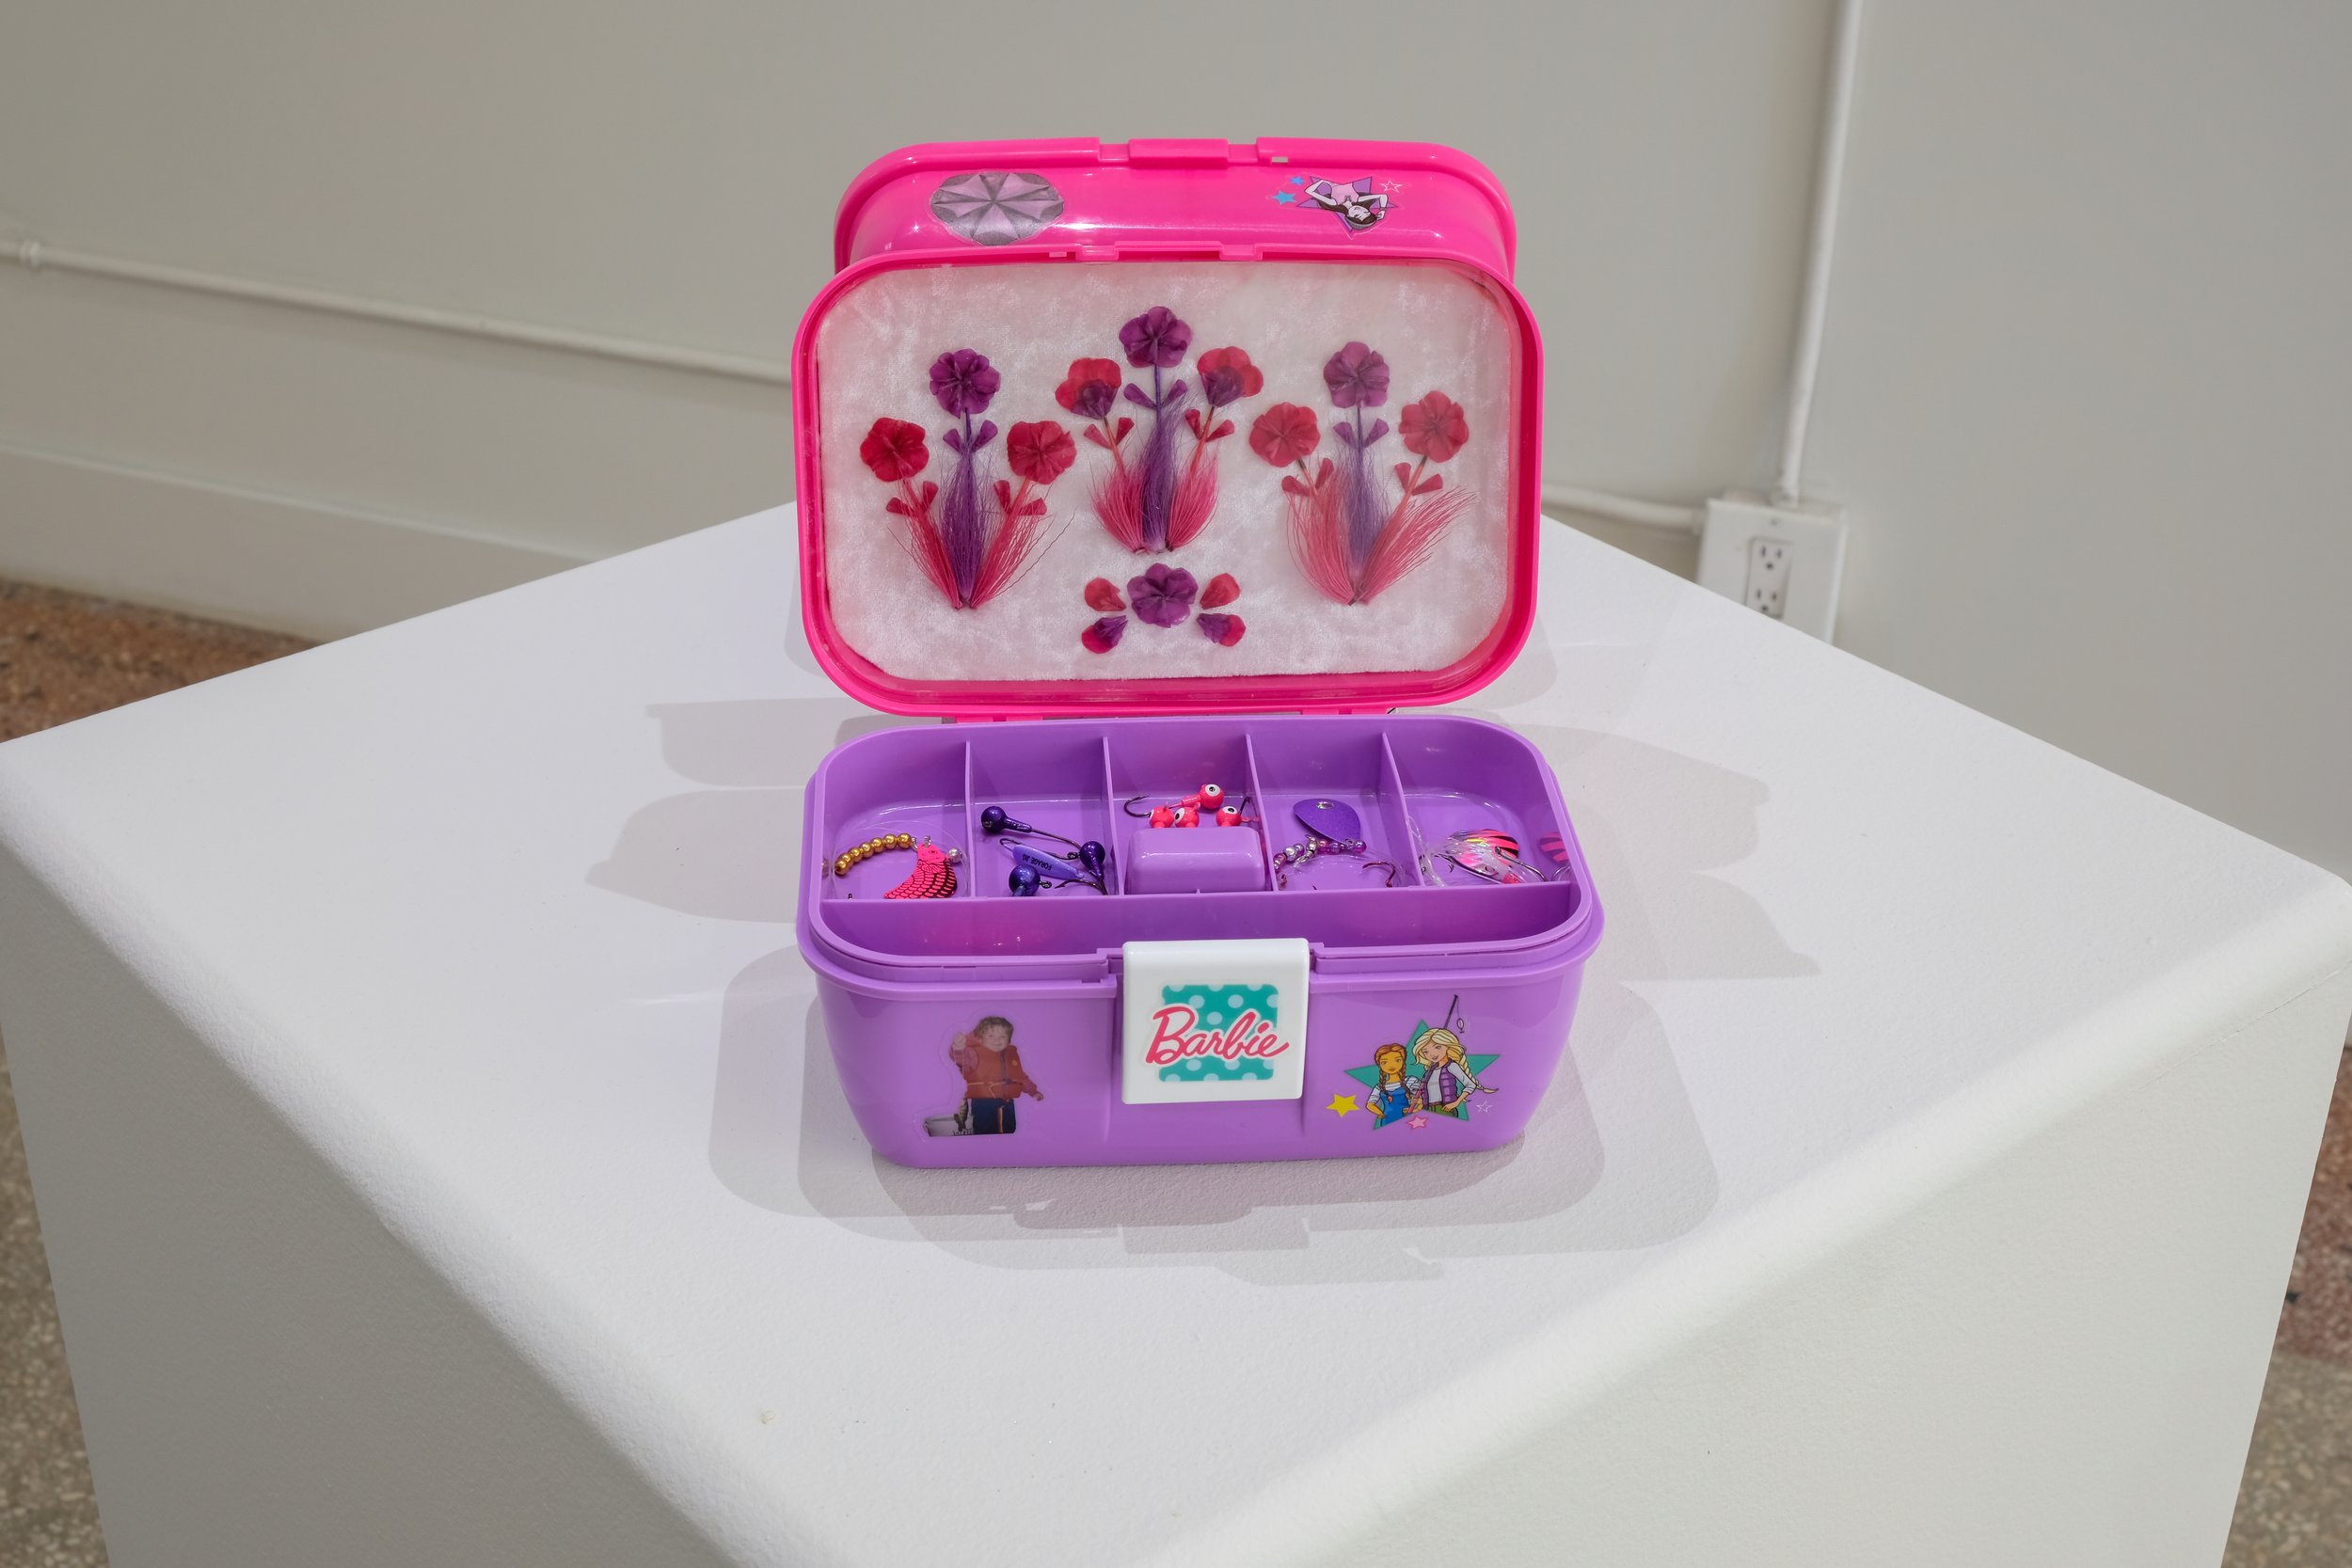 Erin Konsmo, My pretty femme tackle box (1 and 2), 2023